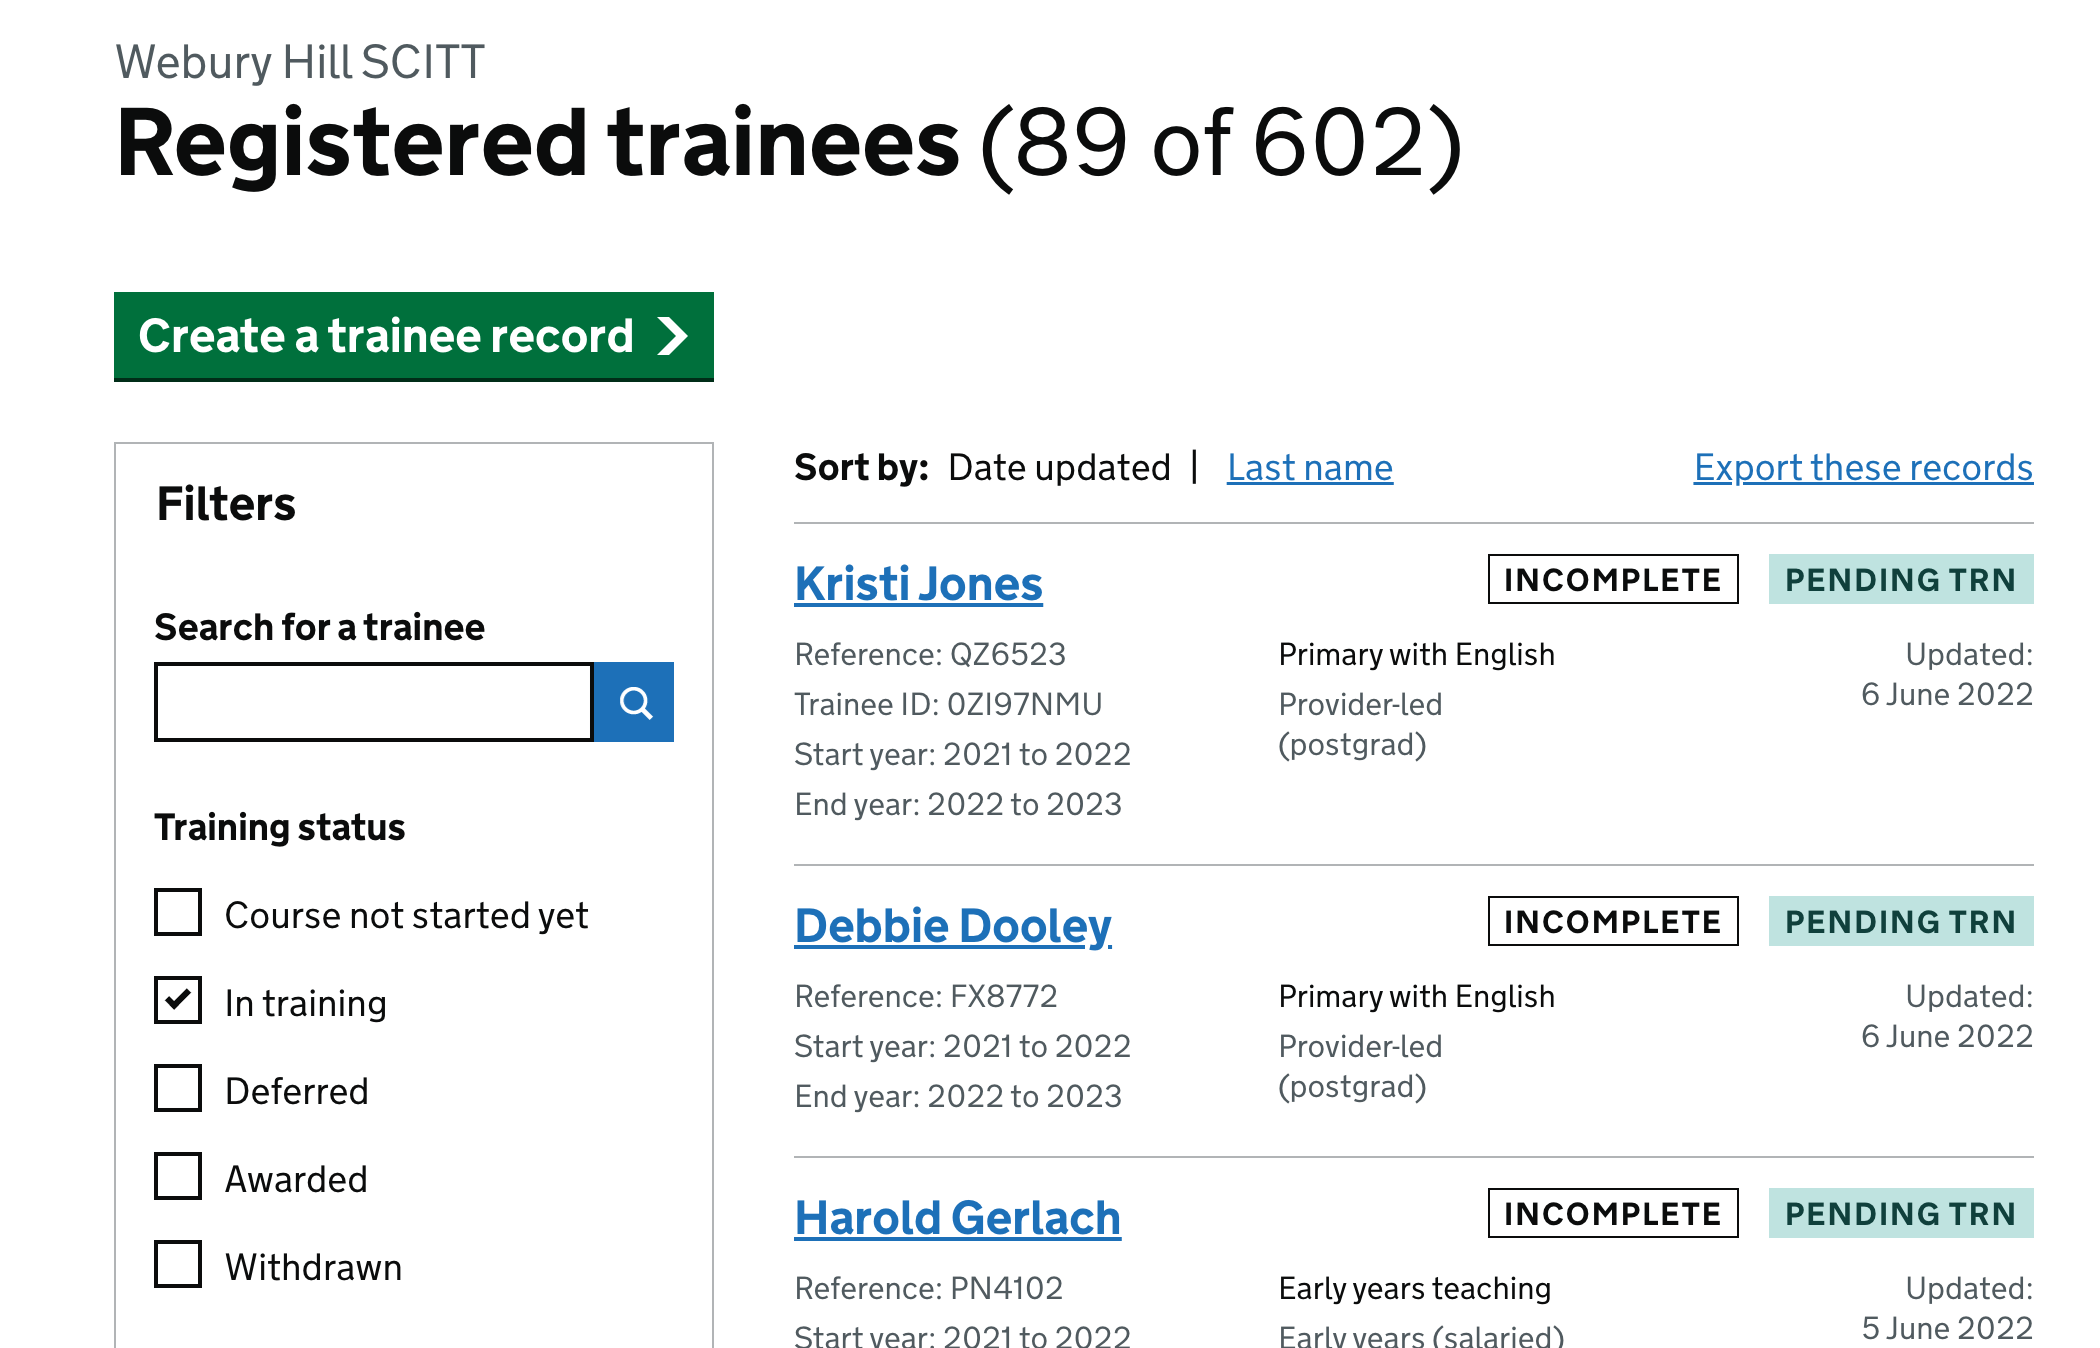 New filters for training status